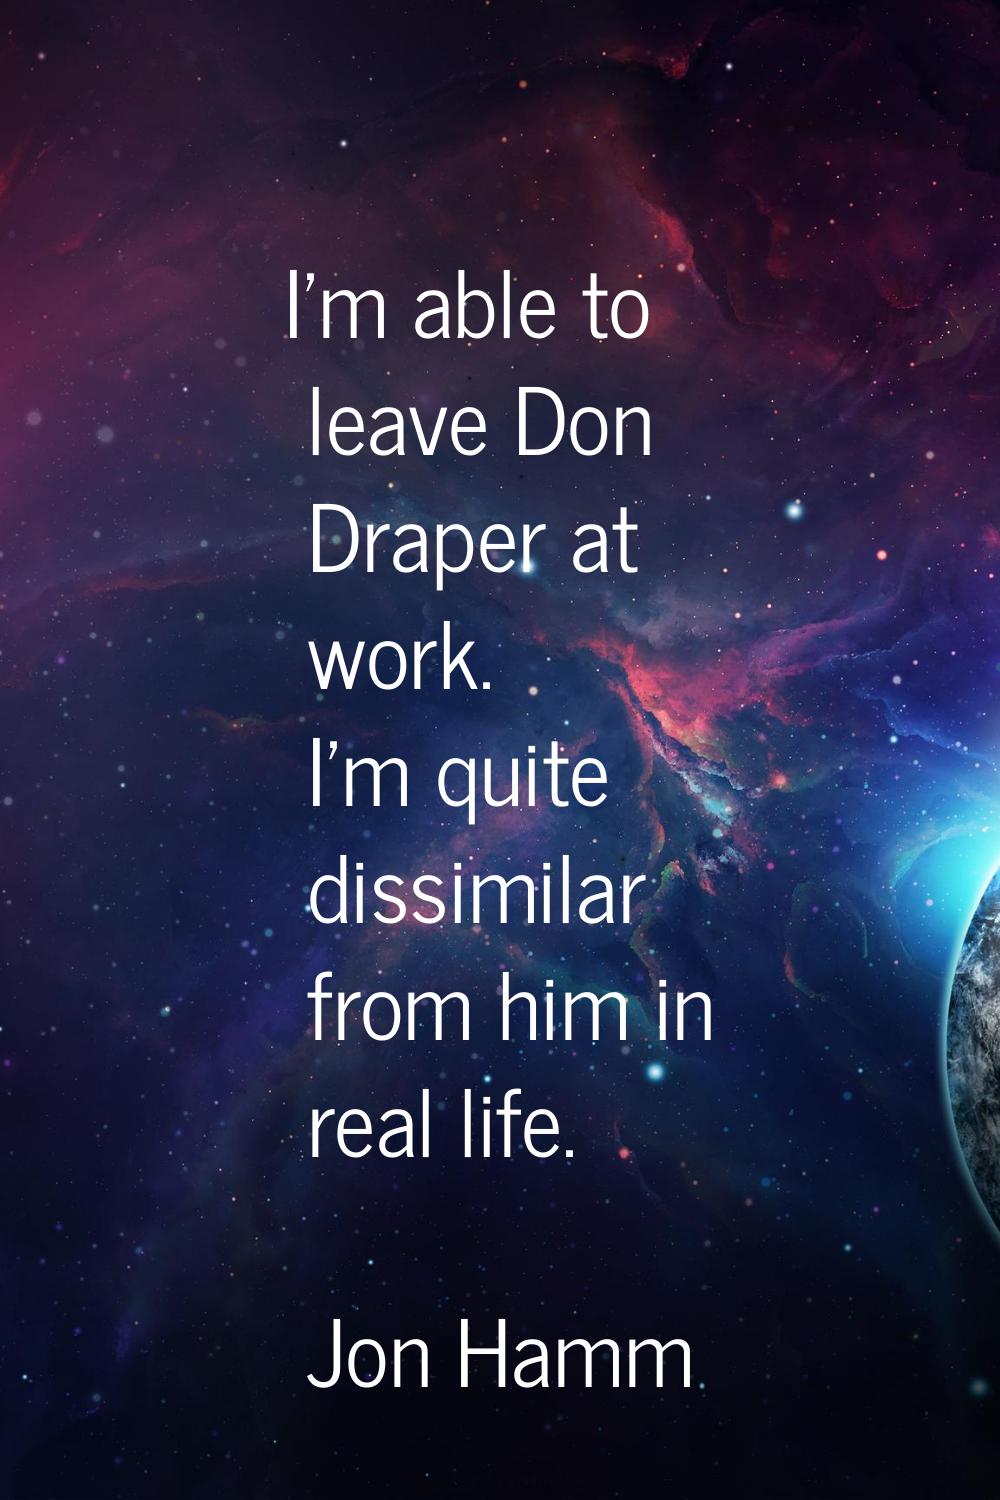 I'm able to leave Don Draper at work. I'm quite dissimilar from him in real life.